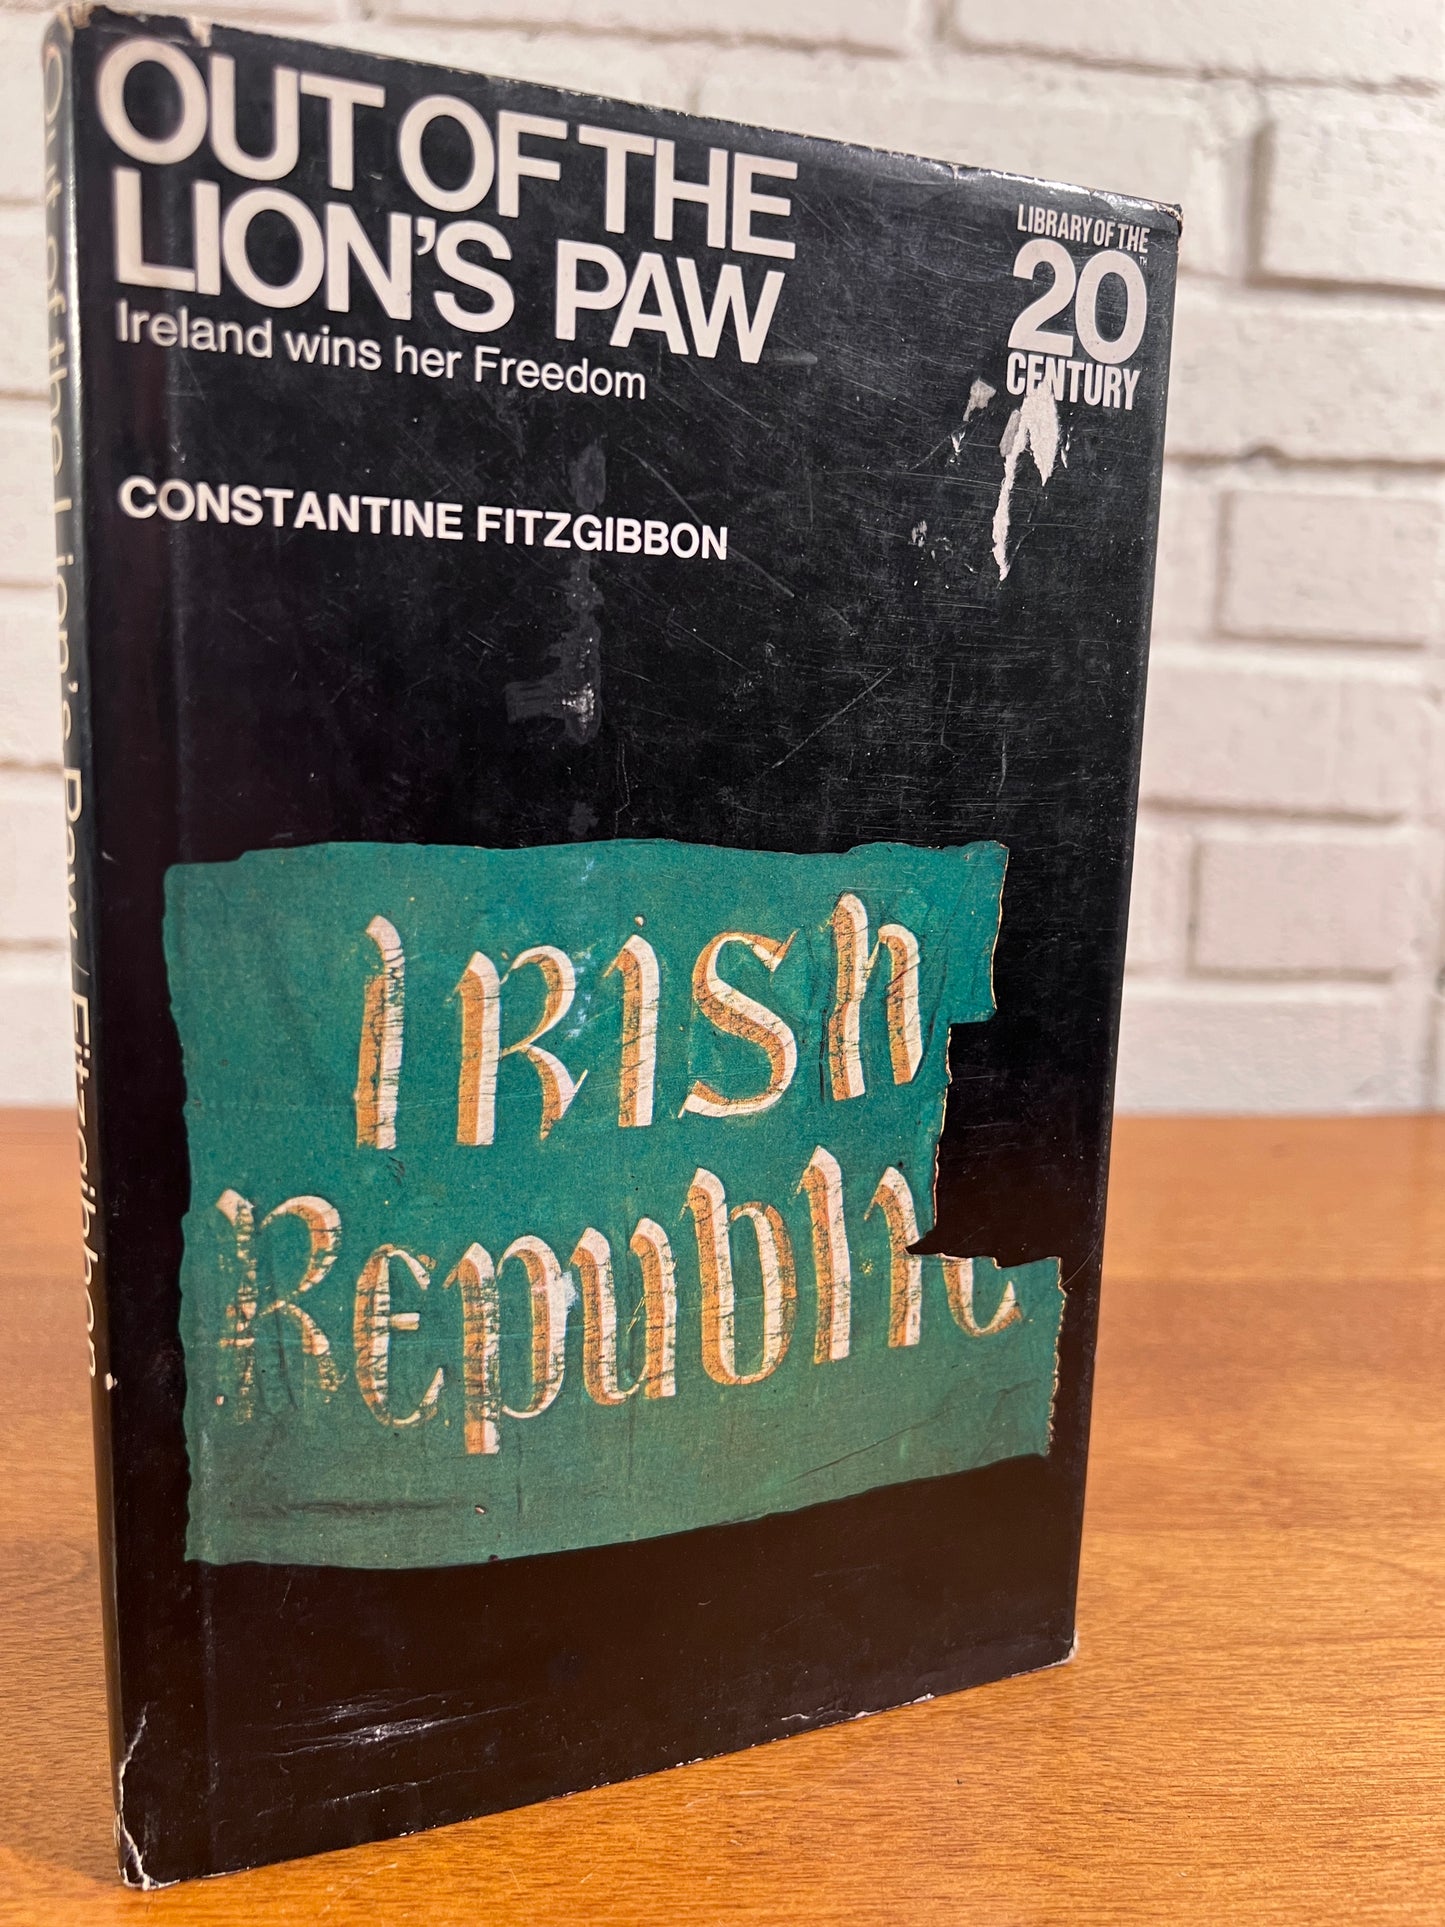 Out of the Lion's Paw, Ireland Win Her Freedom by Constantine Fitzgibbon